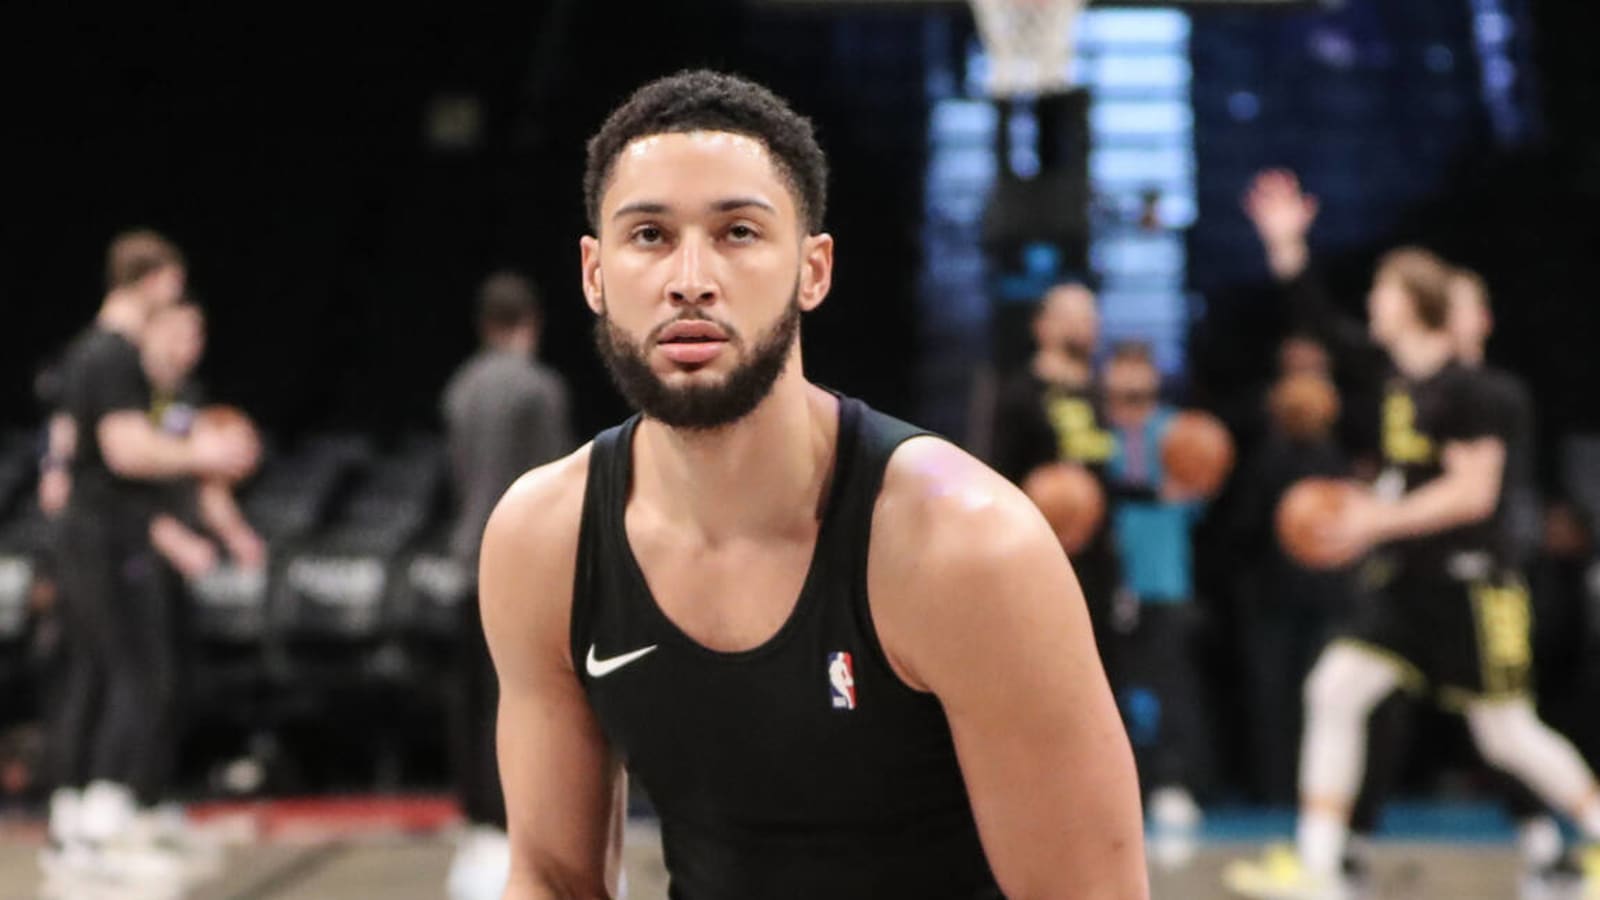 Should Ben Simmons consider retirement after another lost season?